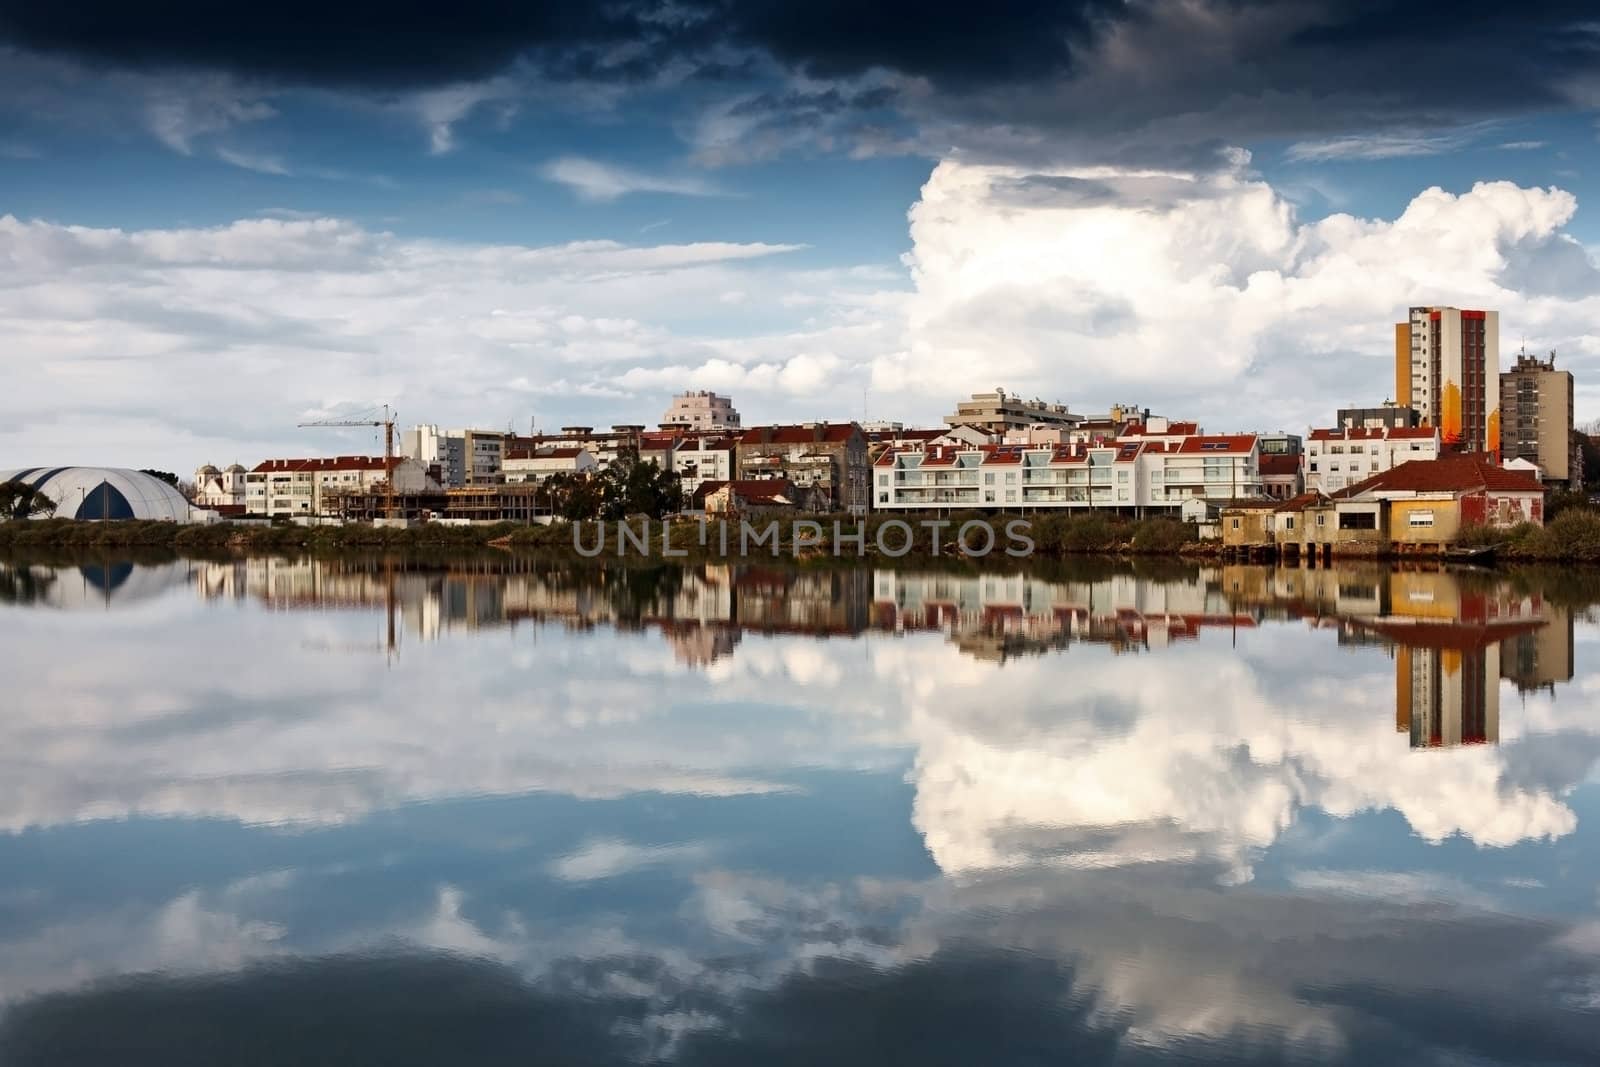 Reflection of an old fishing village by the river.